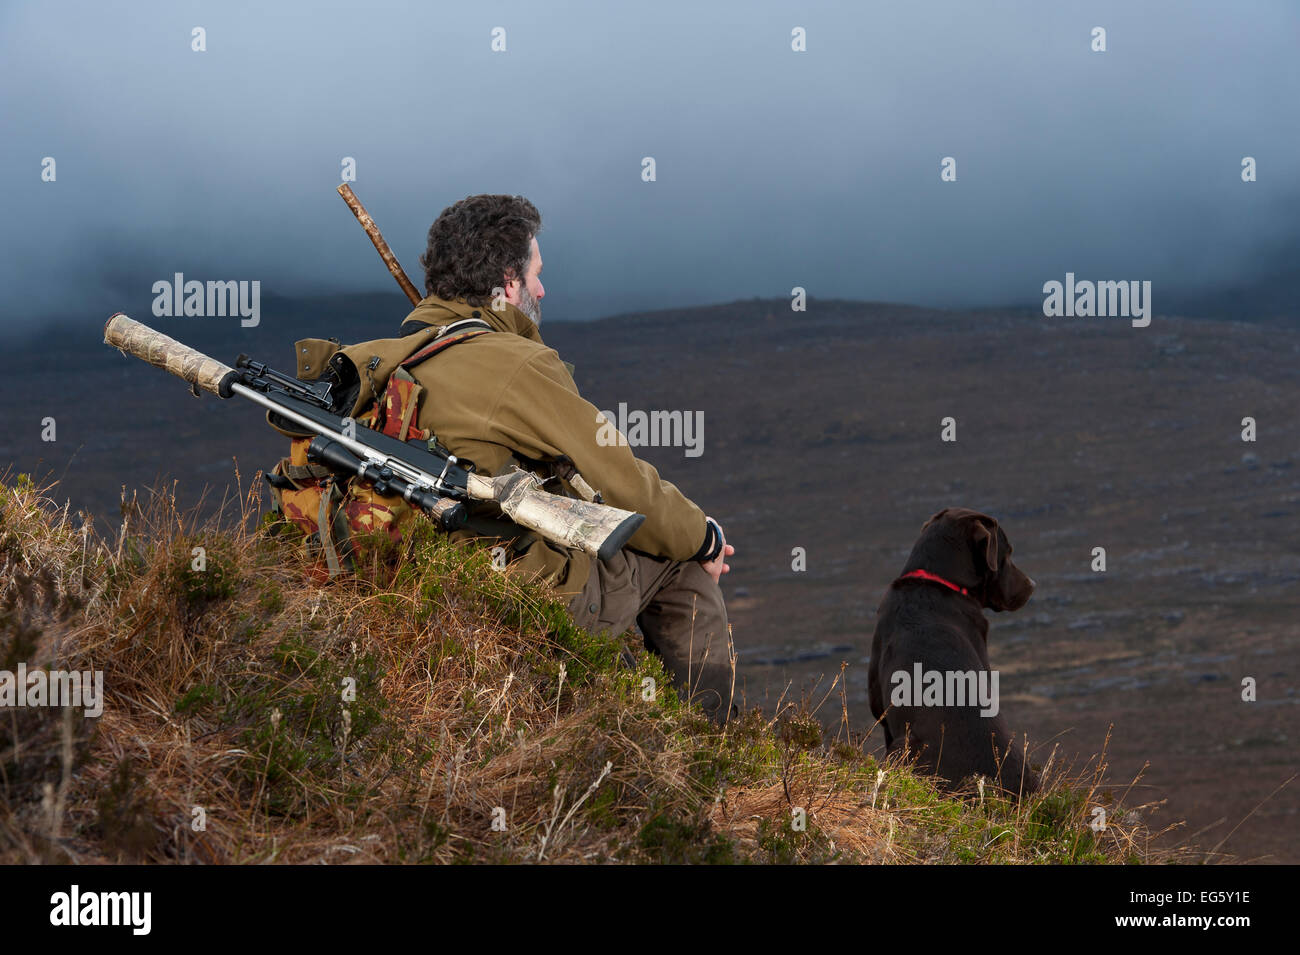 Don o’Driscoll, JMT, looking out over the moorland, with dog, Quinag, Sutherland, Highland, Scotland, UK, January 2011. 2020VISI Stock Photo